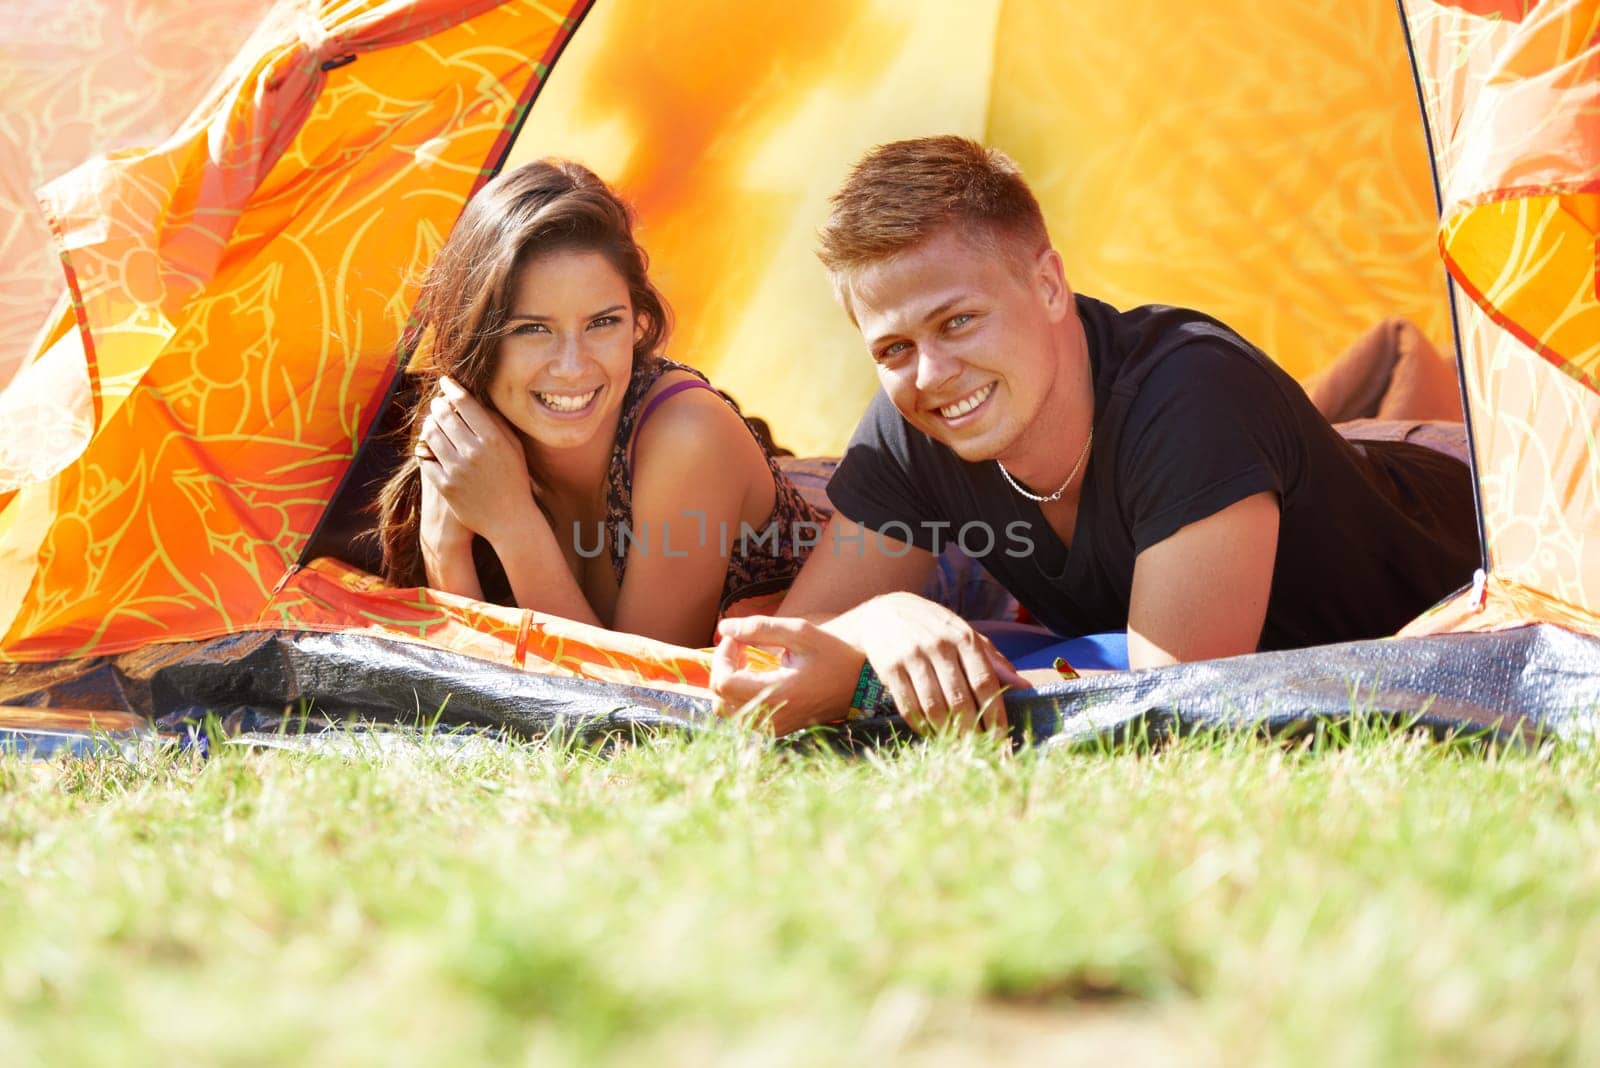 Happy couple, portrait and relax in tent for camping, bonding or outdoor adventure together. Face of young man and woman with smile enjoying fun holiday weekend, vacation or campsite on green grass by YuriArcurs